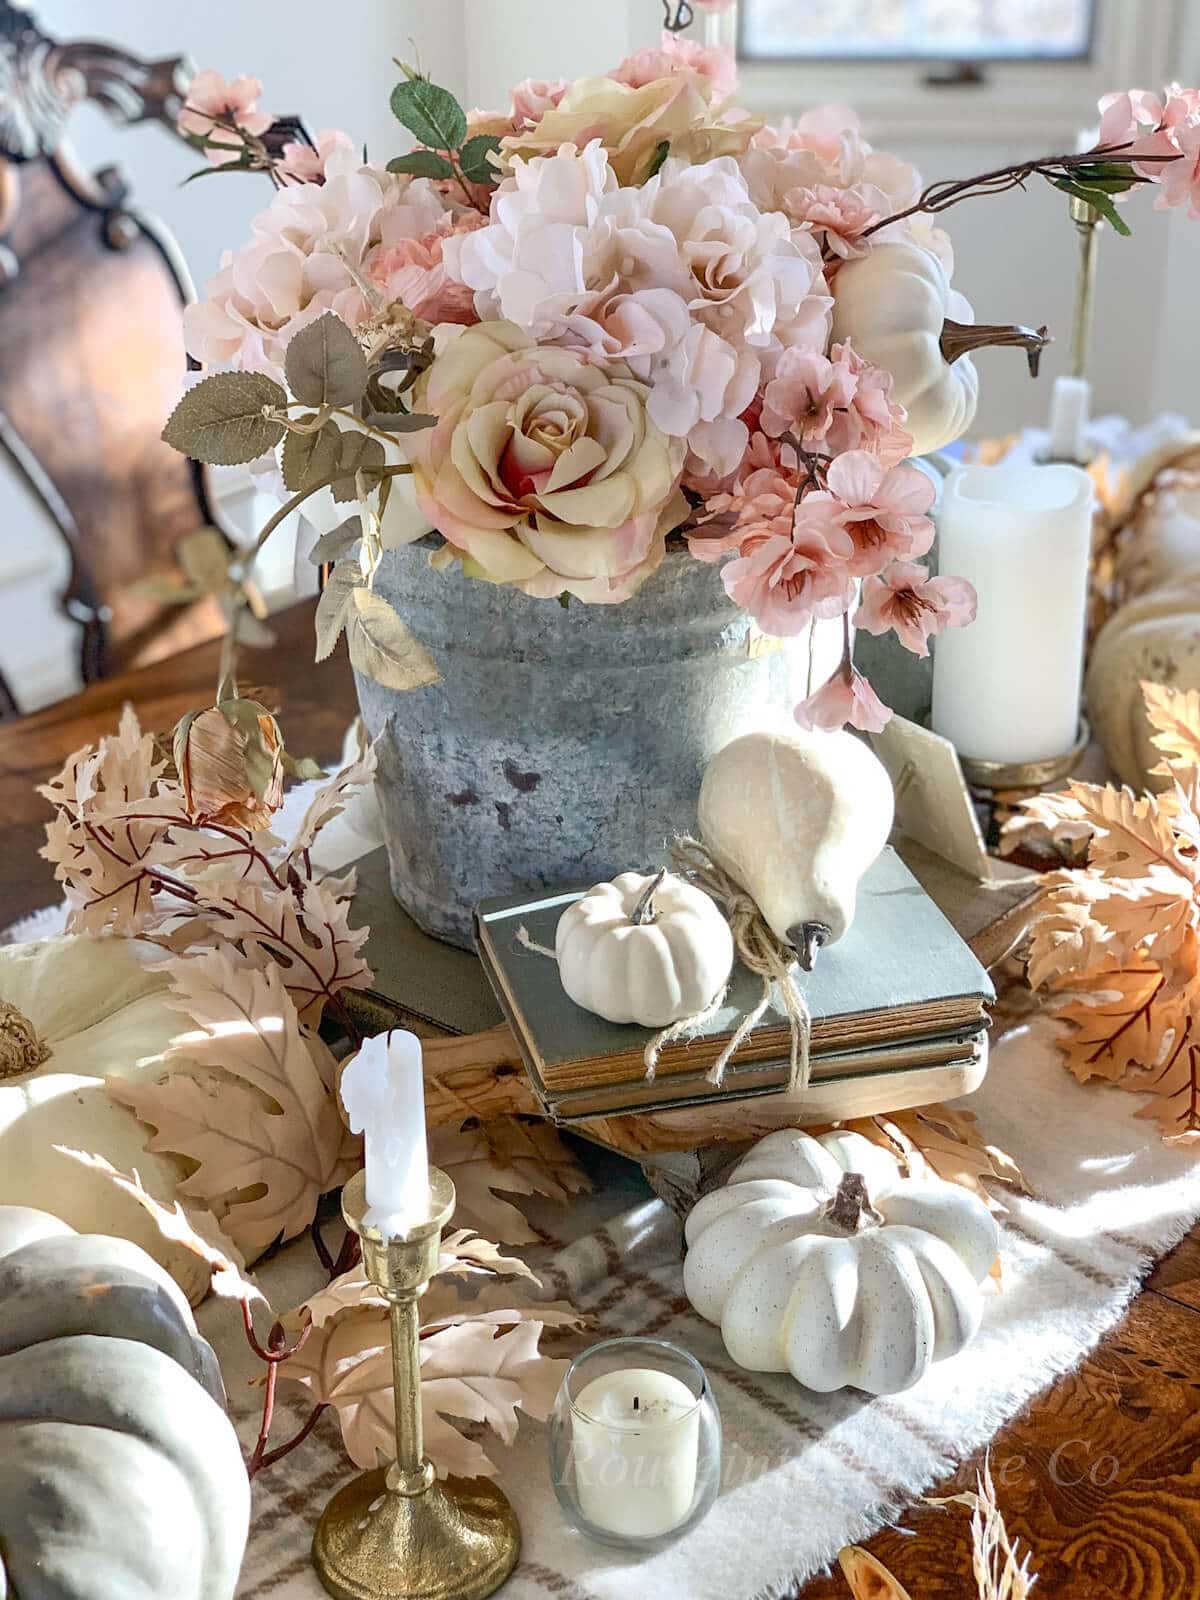 A Thanksgiving centerpiece consists of a fall flower arrangement in a galvanized bucket on a serving tray. A stack of vintage book accents with arrangement. Faux pumpkins and pears are resting on the books and table runner.